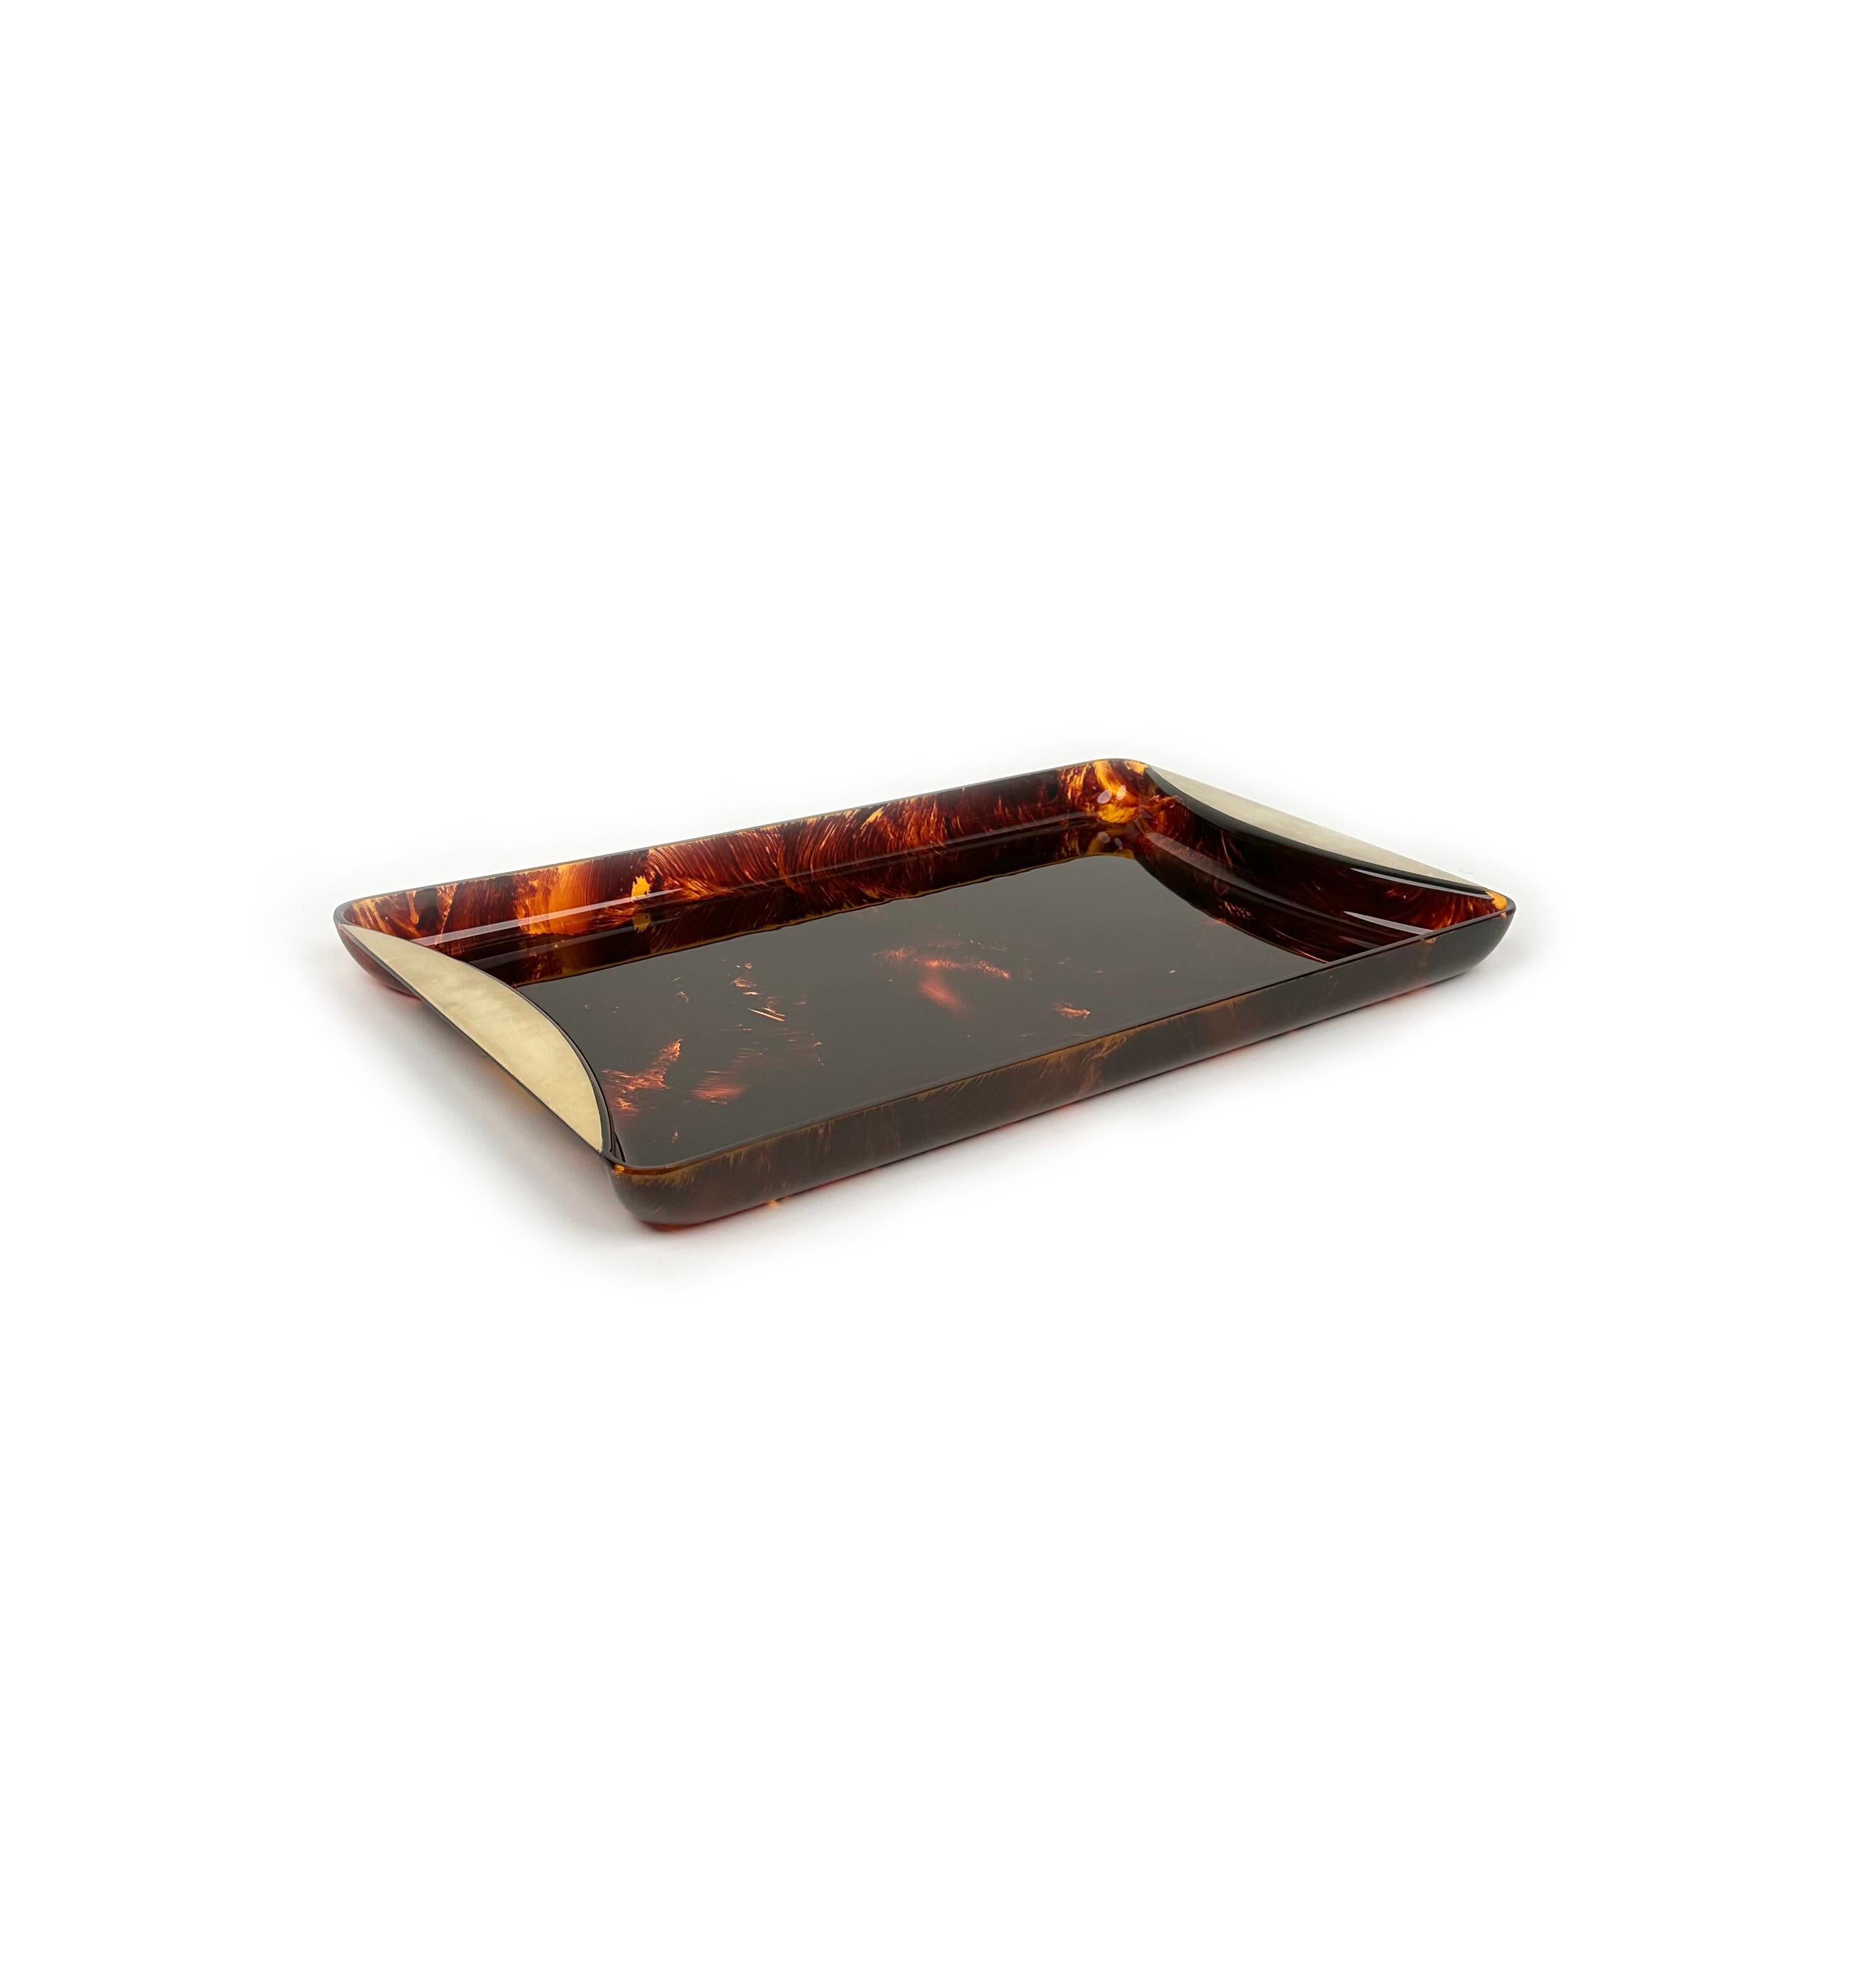 Rectangular serving tray in tortoiseshell-effect lucite with brass handles designed by Guzzini. 

Made in Italy in the 1970s.